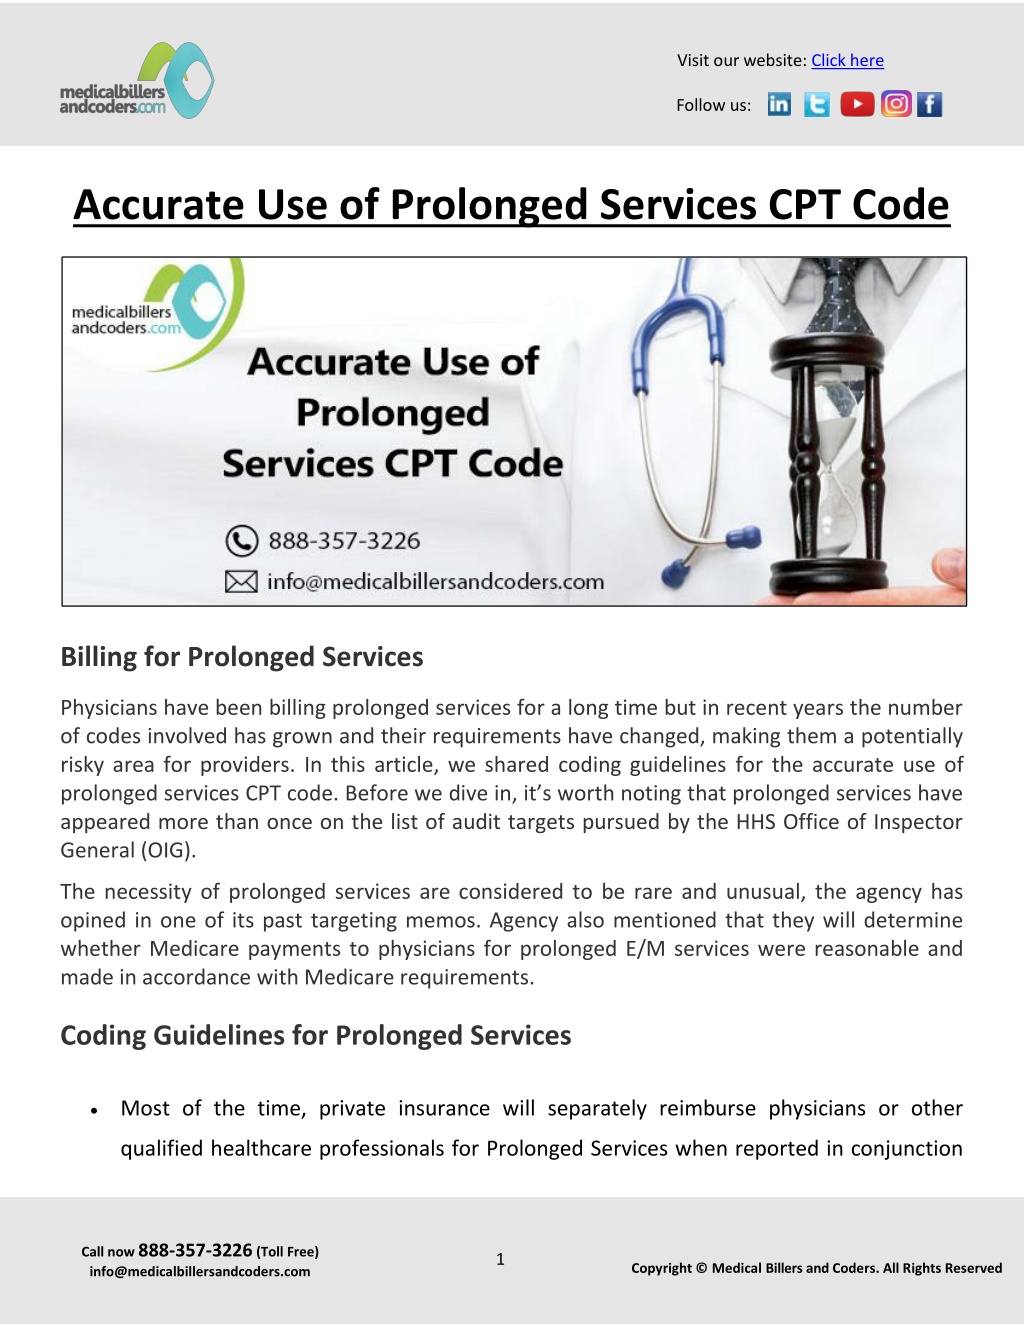 PPT Accurate Use of Prolonged Services CPT Code PowerPoint Presentation ID11685763